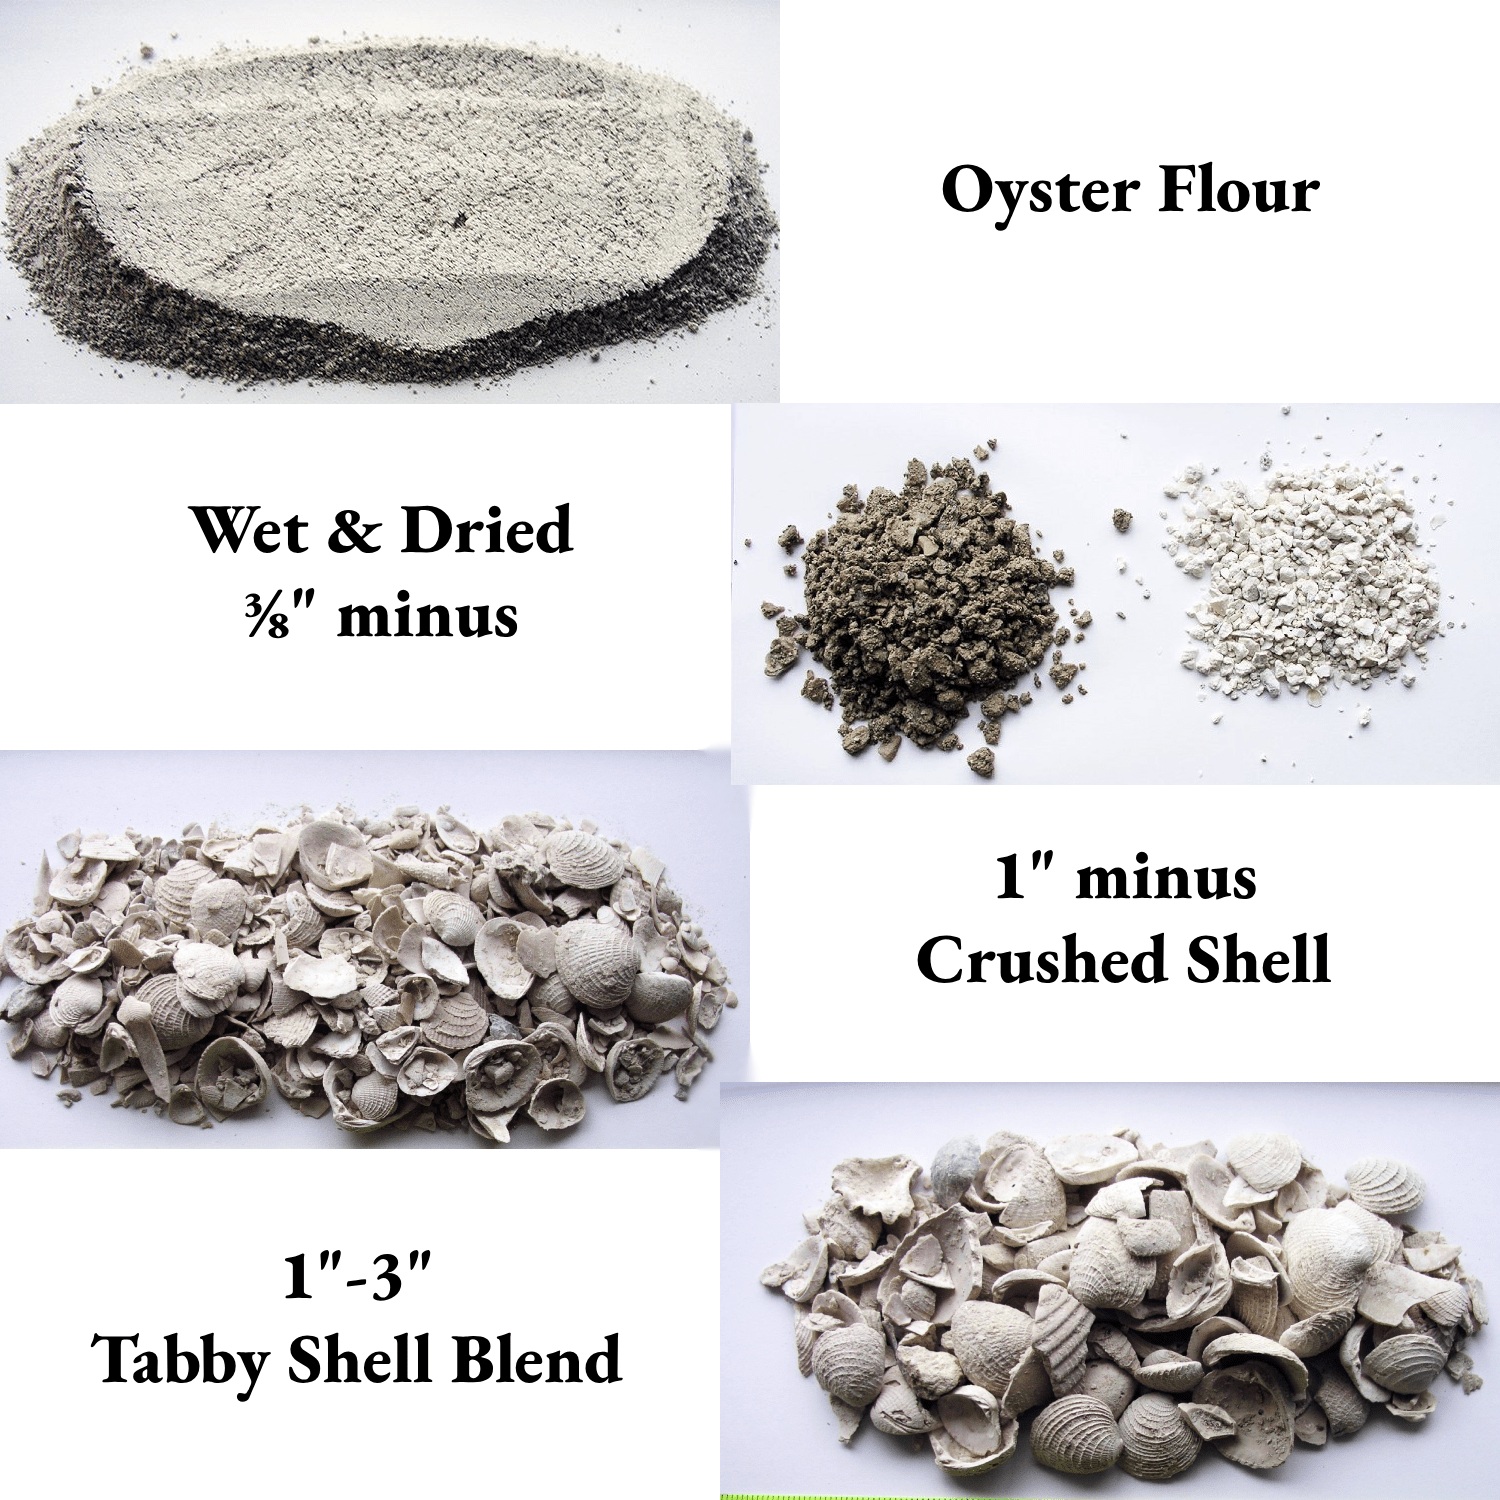 crushed shell samples, crushed oyster shells, crushed clam shells